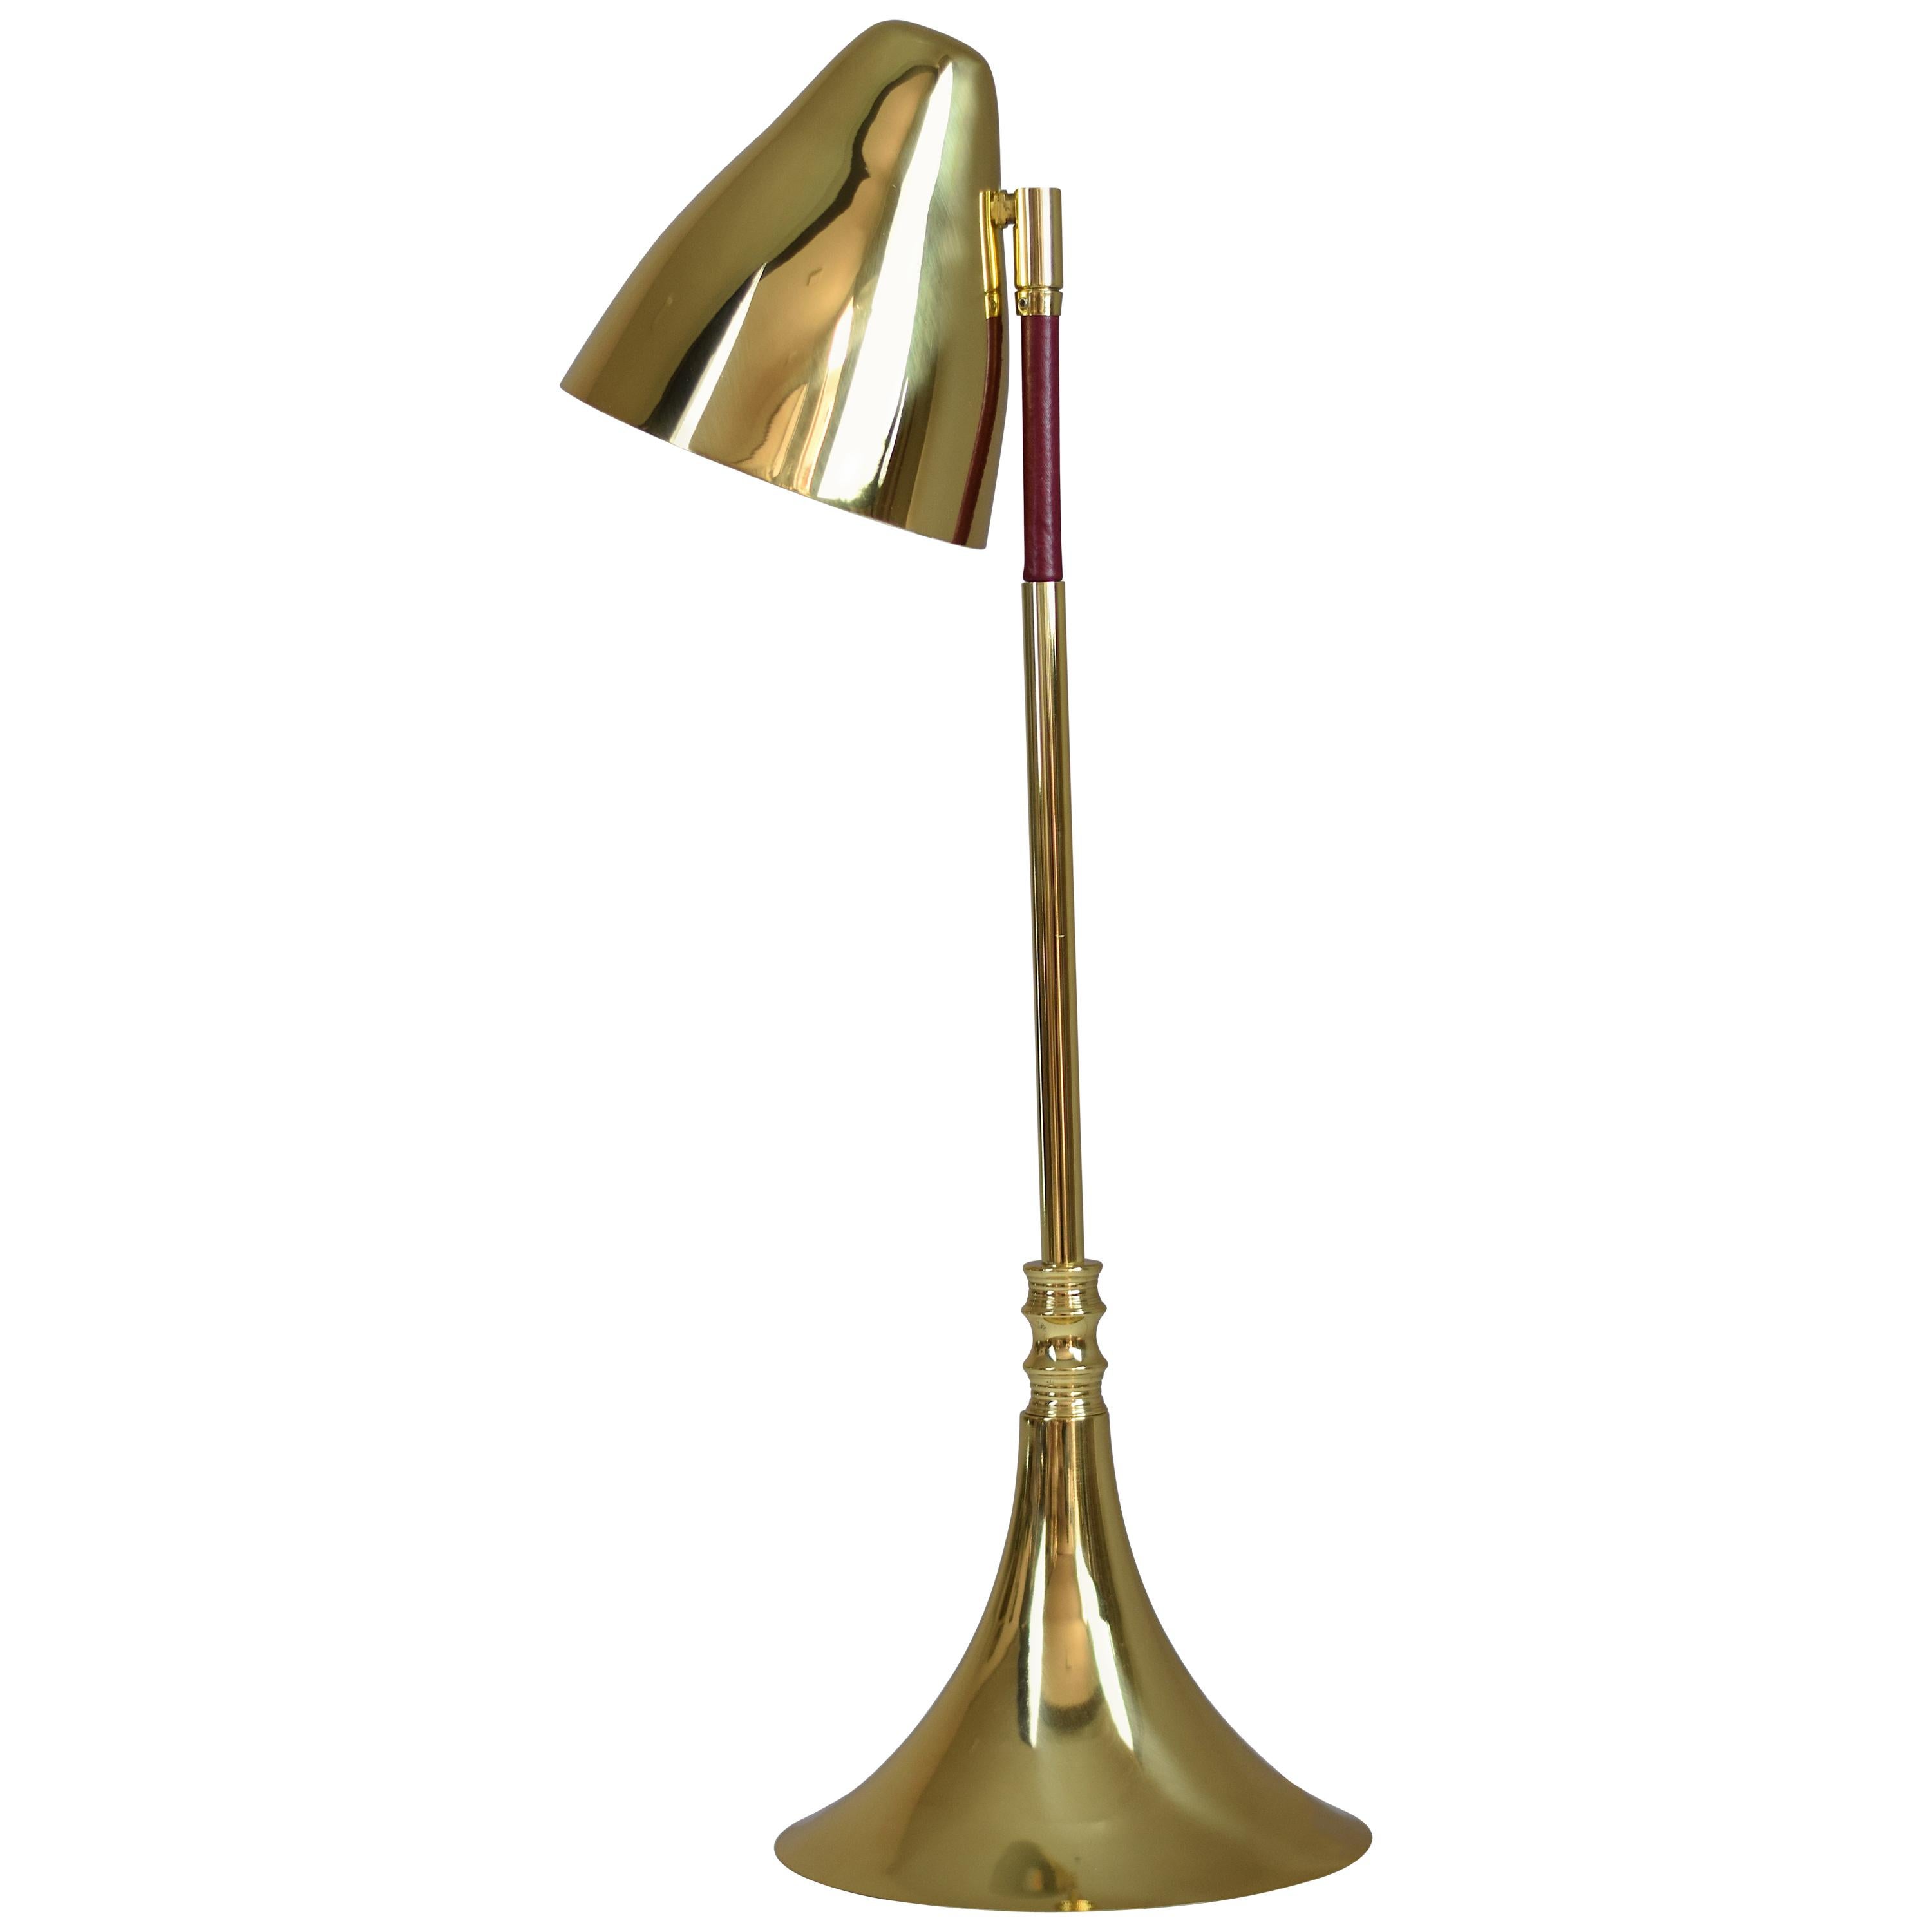 IDRIA-T1 Brass Leather Table Lamp, Flow 2 Collection